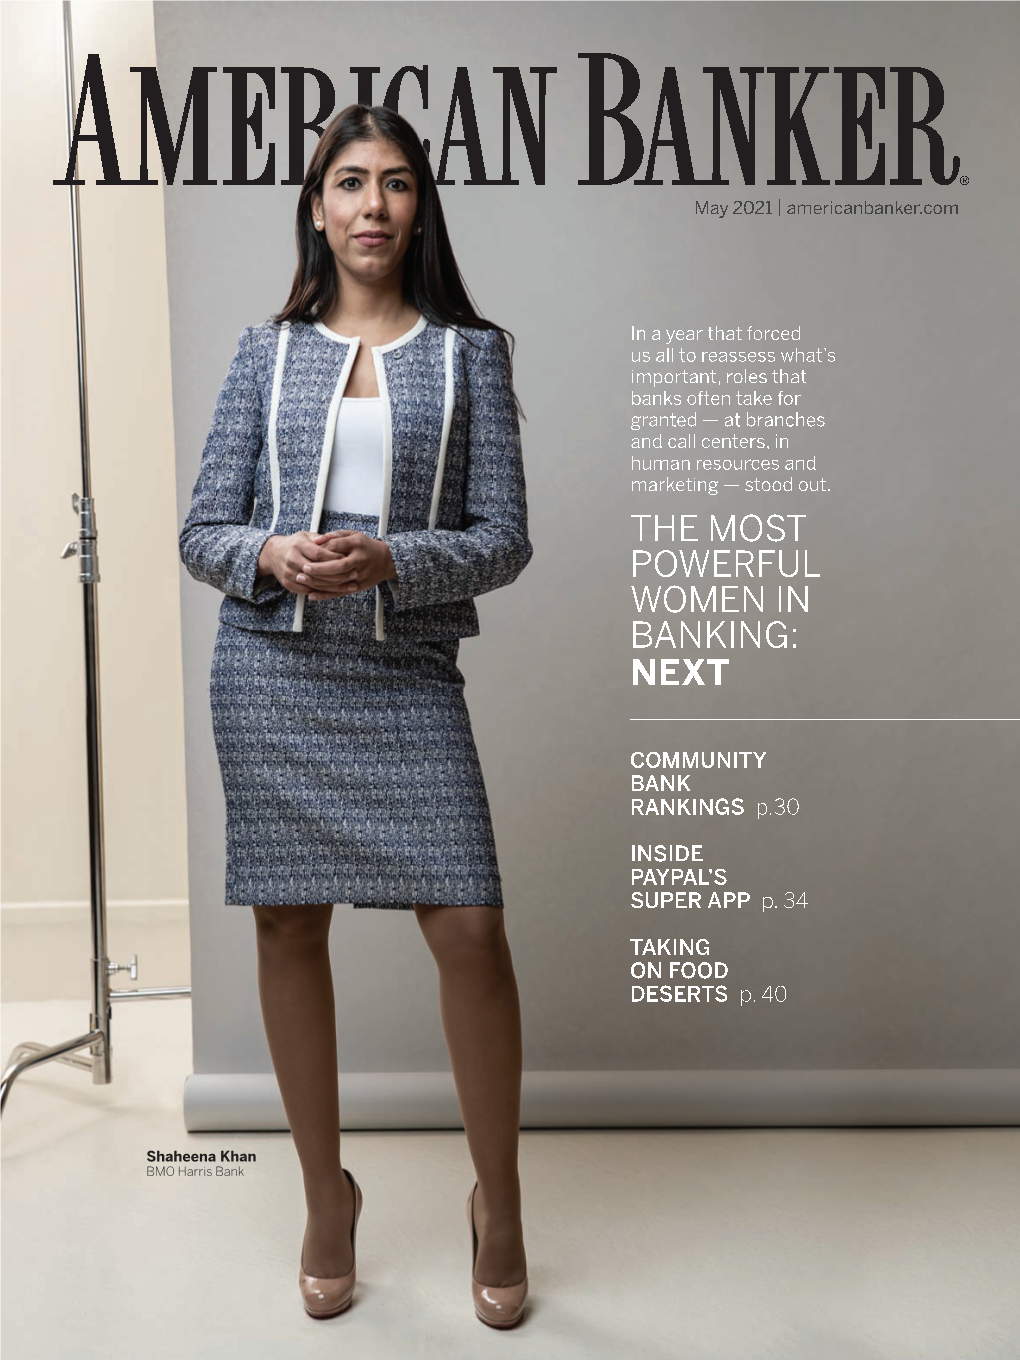 The Most Powerful Women in Banking: Next